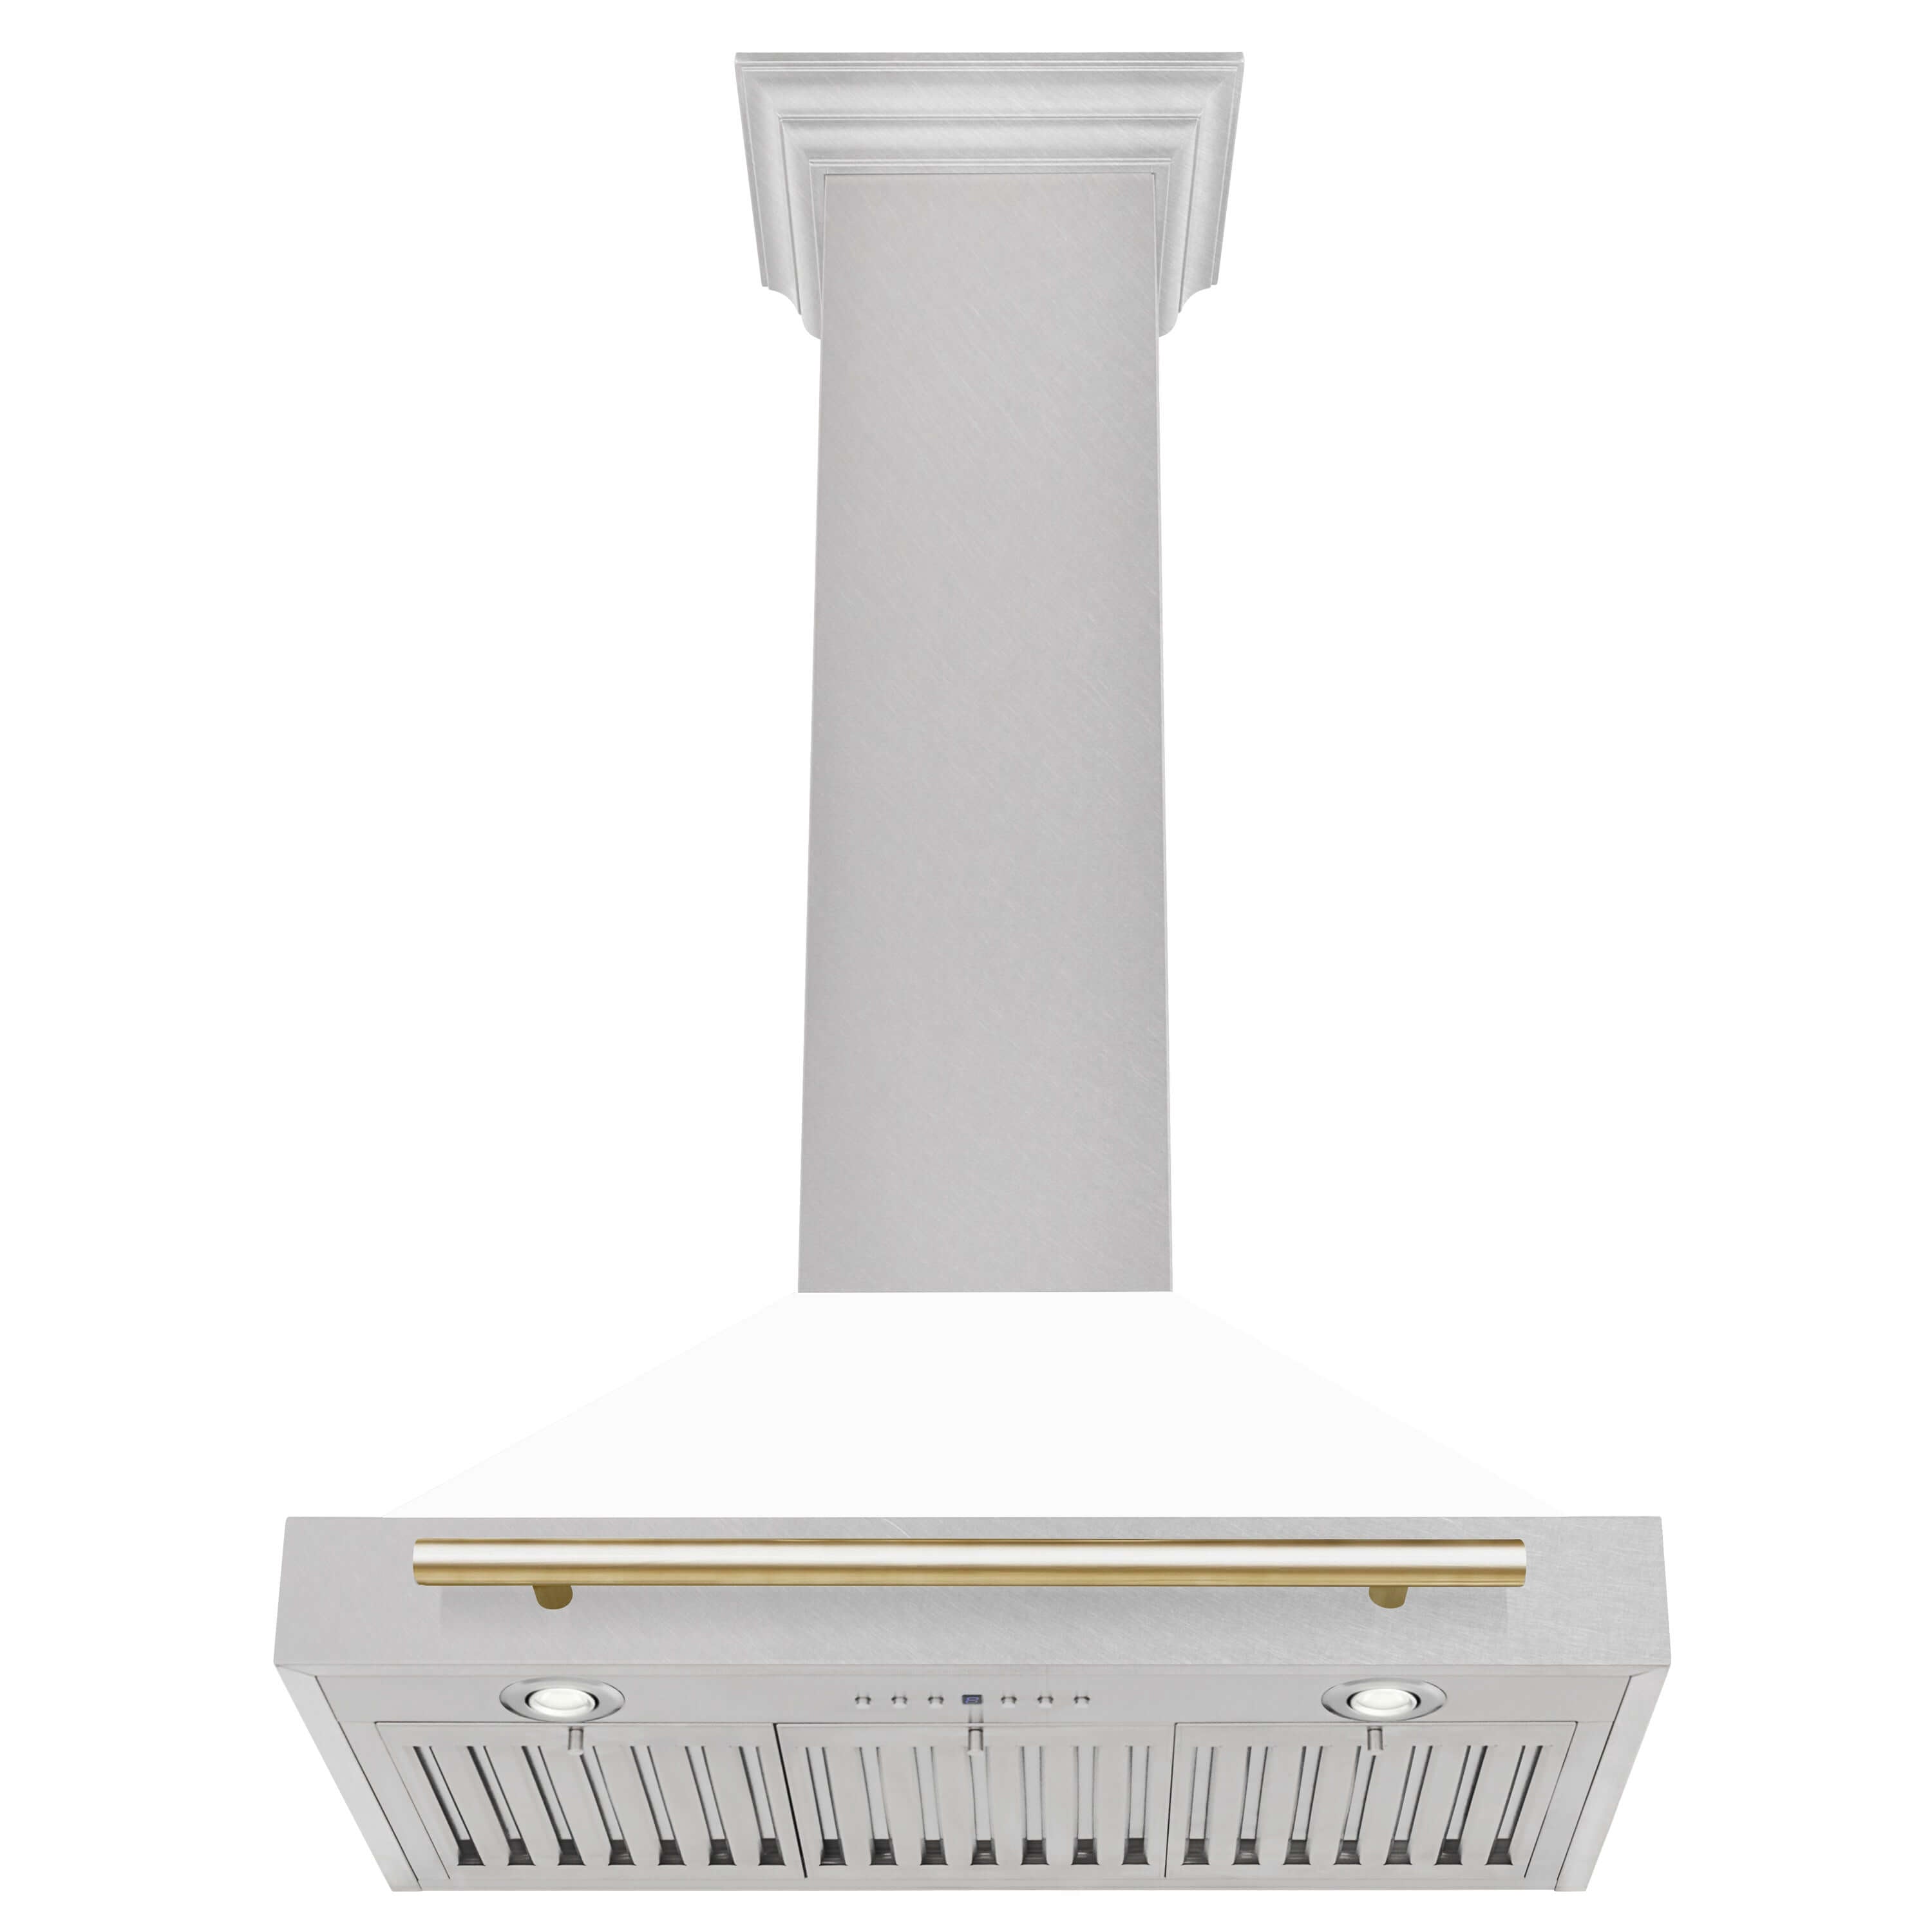 ZLINE 30 in. Autograph Edition Fingerprint Resistant Stainless Steel Range Hood with White Matte Shell and Gold Handle Under View